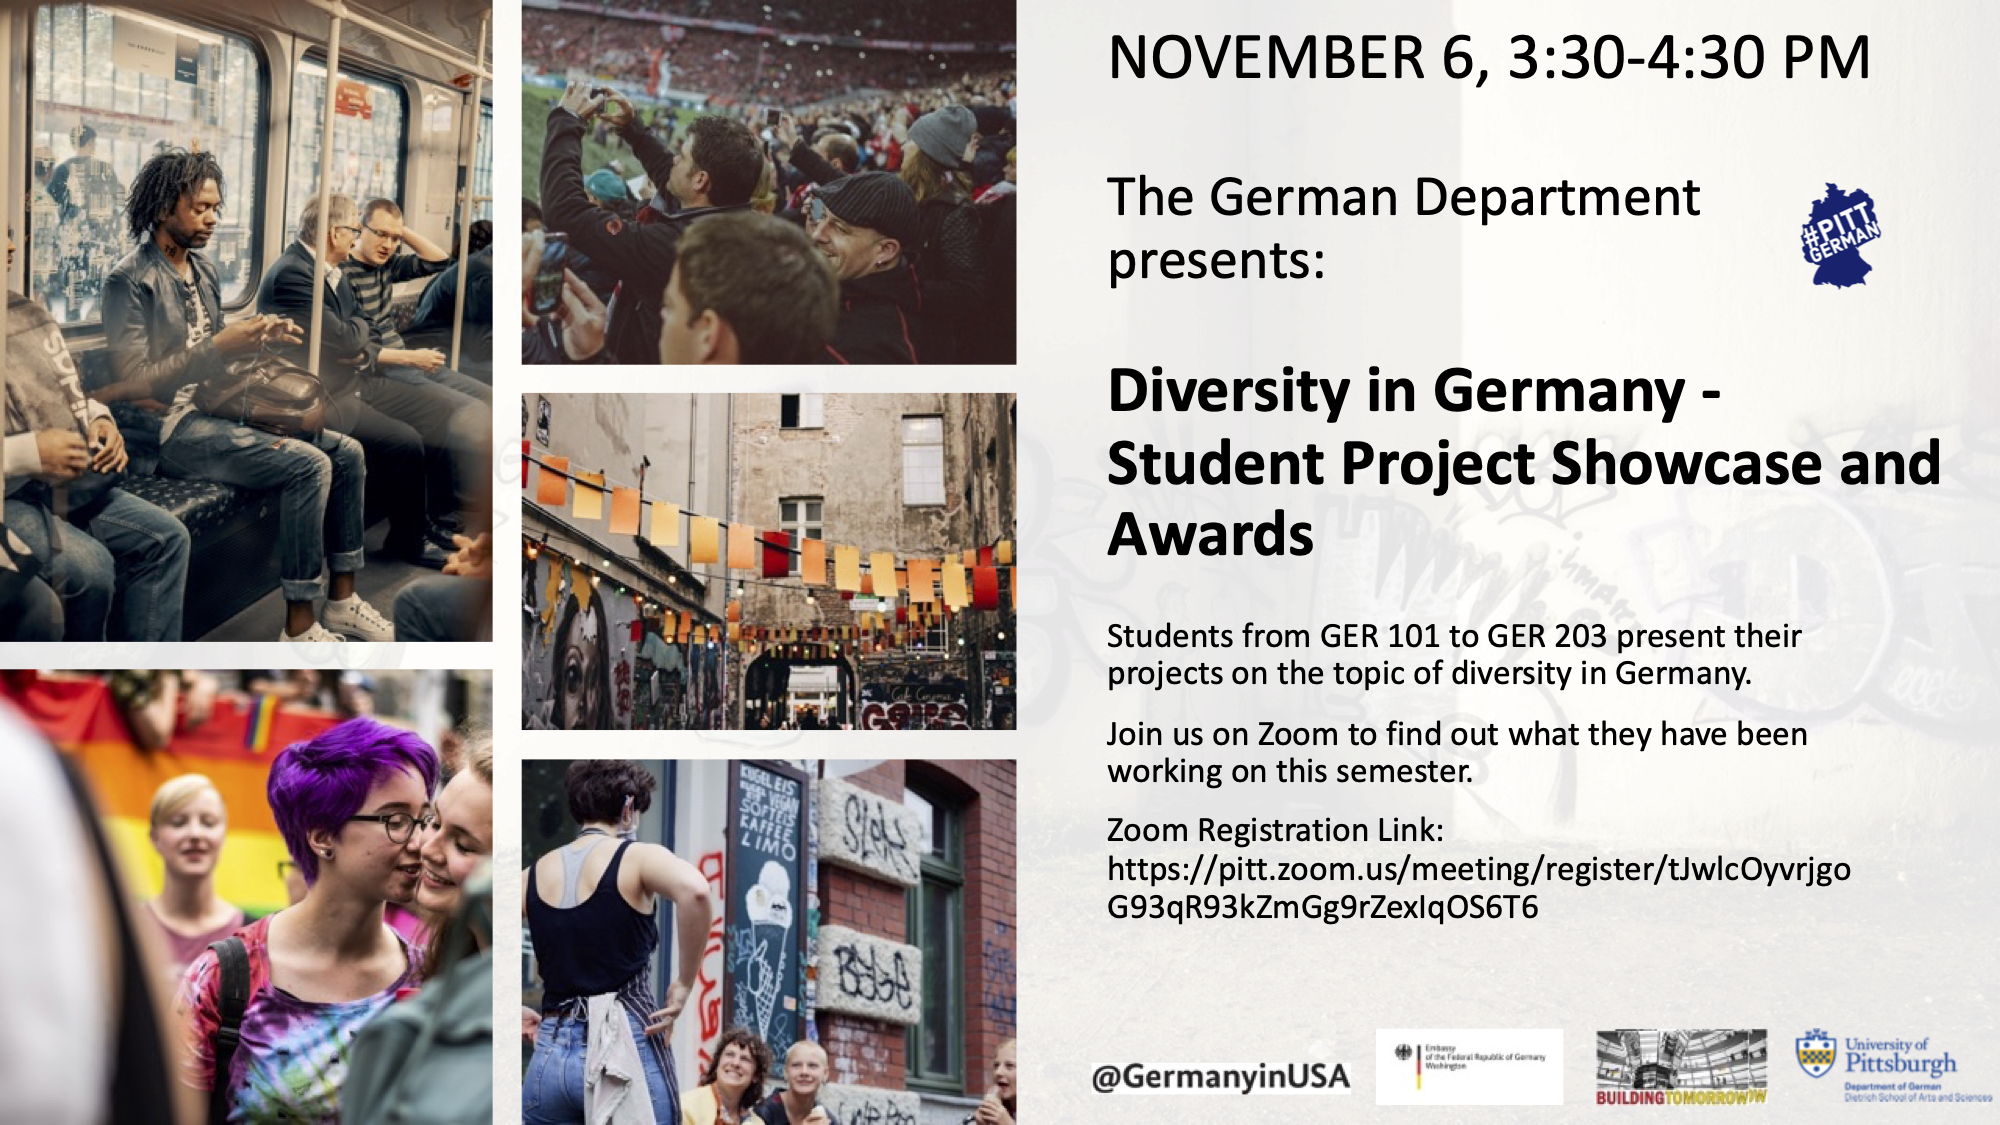 NOVEMBER 6, 3:30-4:30 PM The German Department presents: Diversity in Germany - Student Project Showcase and Awards Students from GER 101 to GER 203 present their projects on the topic of diversity in Germany. Join us on Zoom to find out what they have been working on this semester. Zoom Registration Link: https://pitt.zoom.us/meeting/register/tJwlcOyvrjgo G93qR93kZmGg9rZexIqOS6T6 -- Here there are many people depicted in photographs arranged in a mosaic style with a gray background.